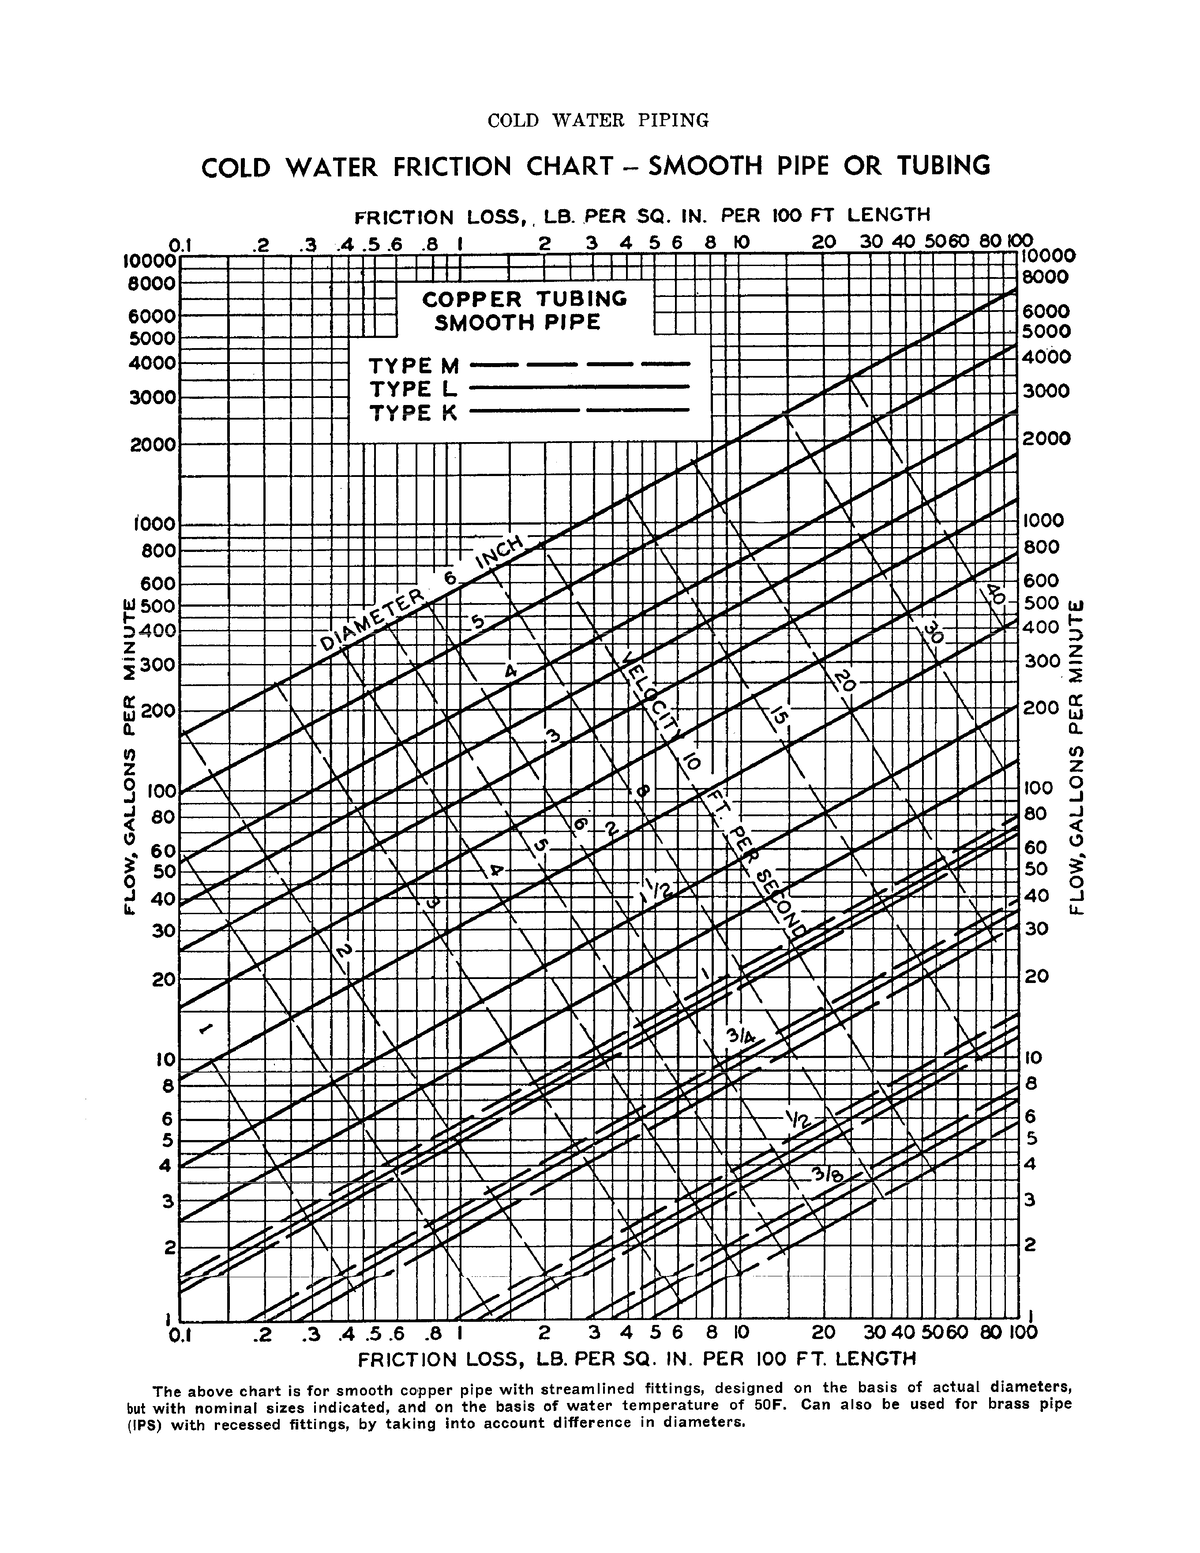 Friction Loss and pipe sizing chart MBA 5015 Studocu